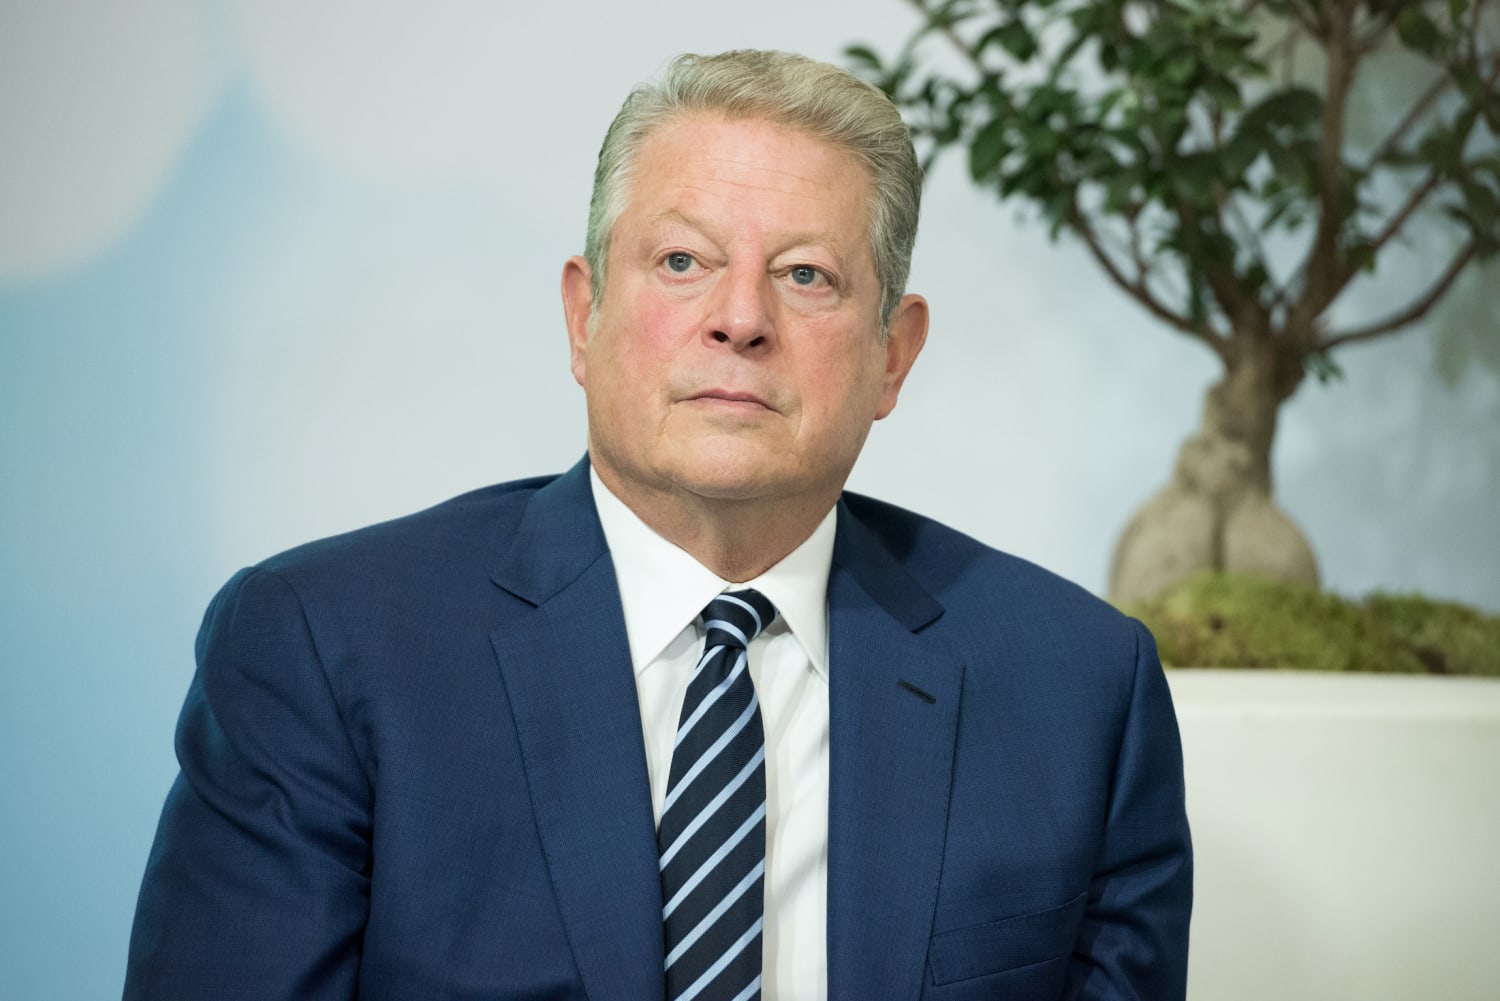 Al Gore: Climate action is 'bound together' with racial equality and liberation